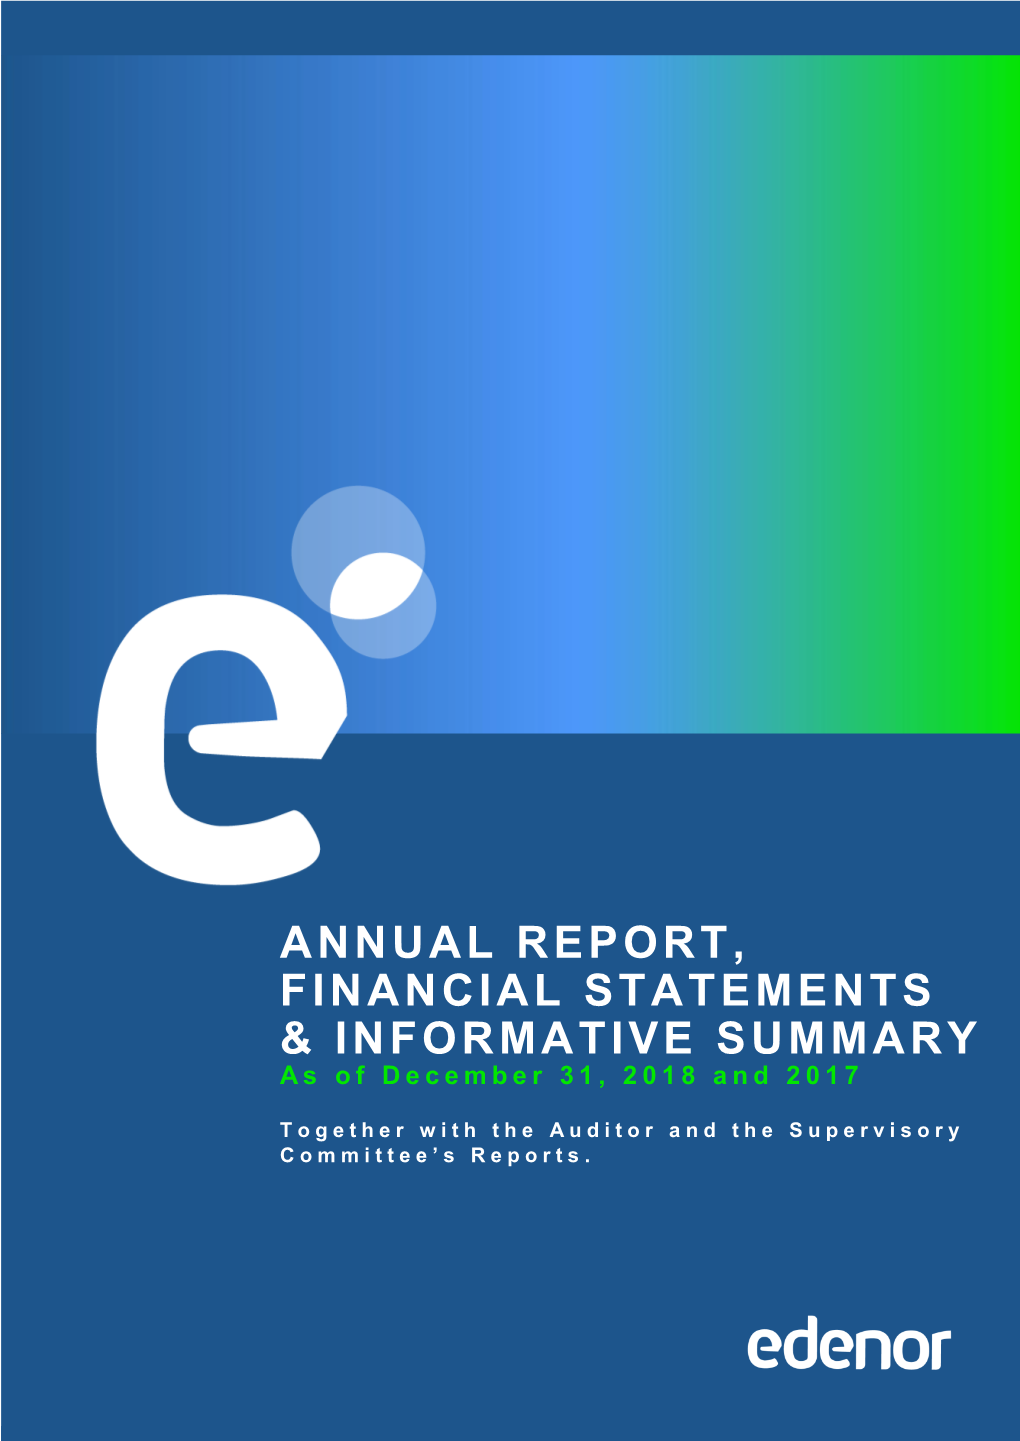 Annual Report, Financial Statements & Informative